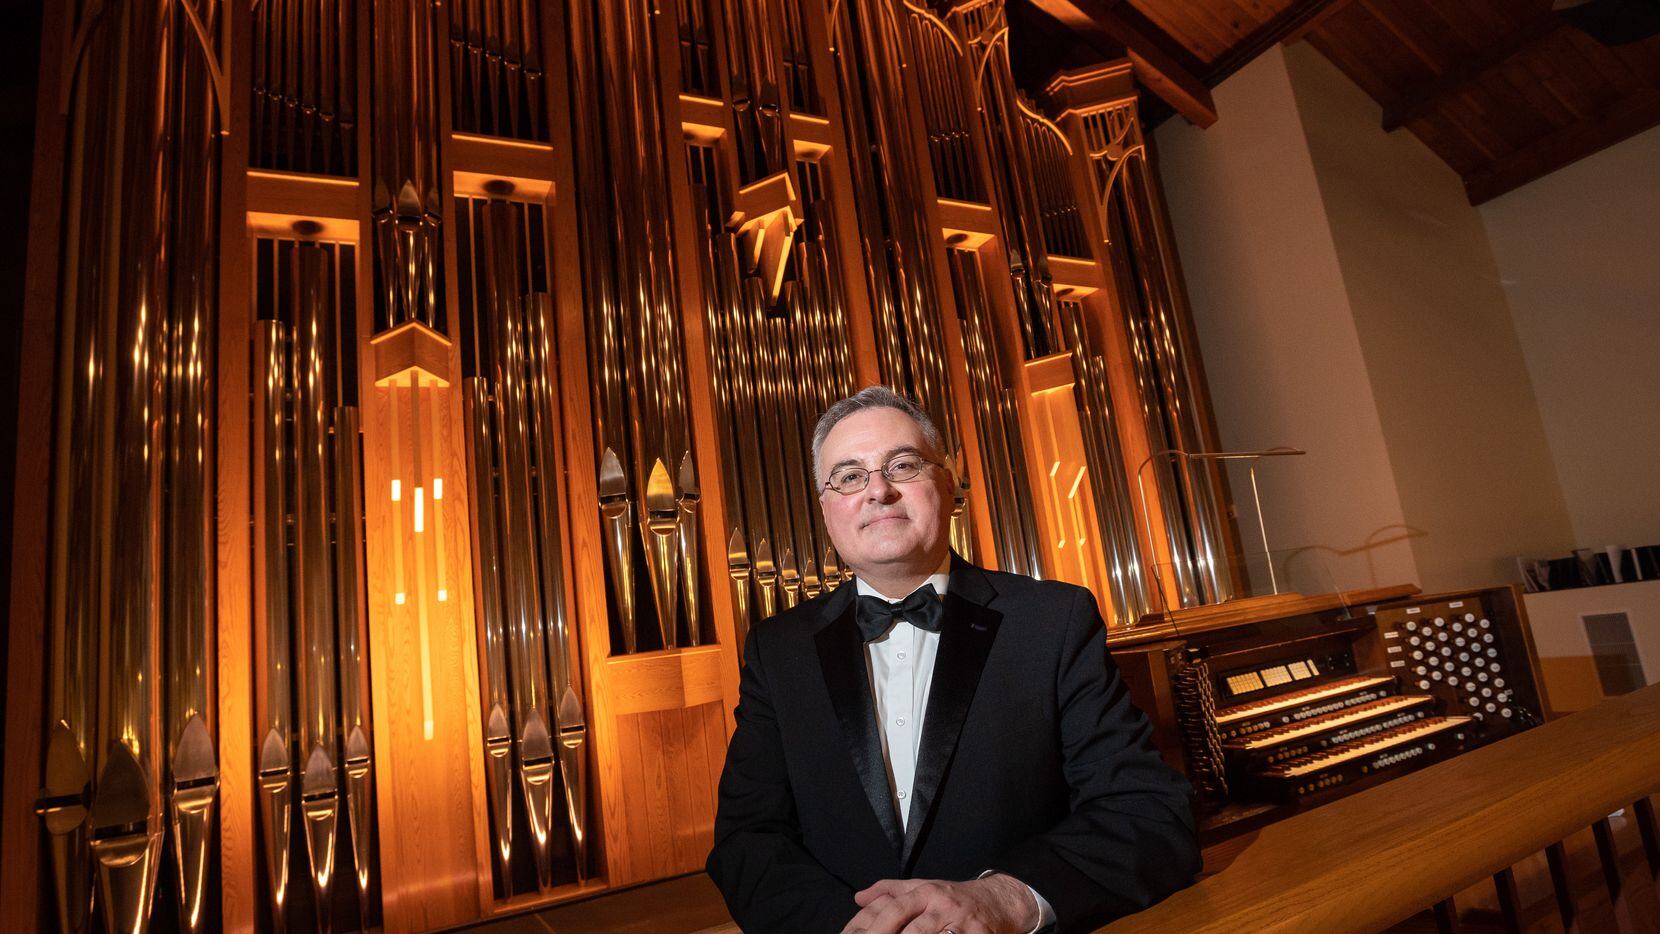 Organist Jeremy David Tarrant with the organ inside the Chapel on the campus of St. Mark's...